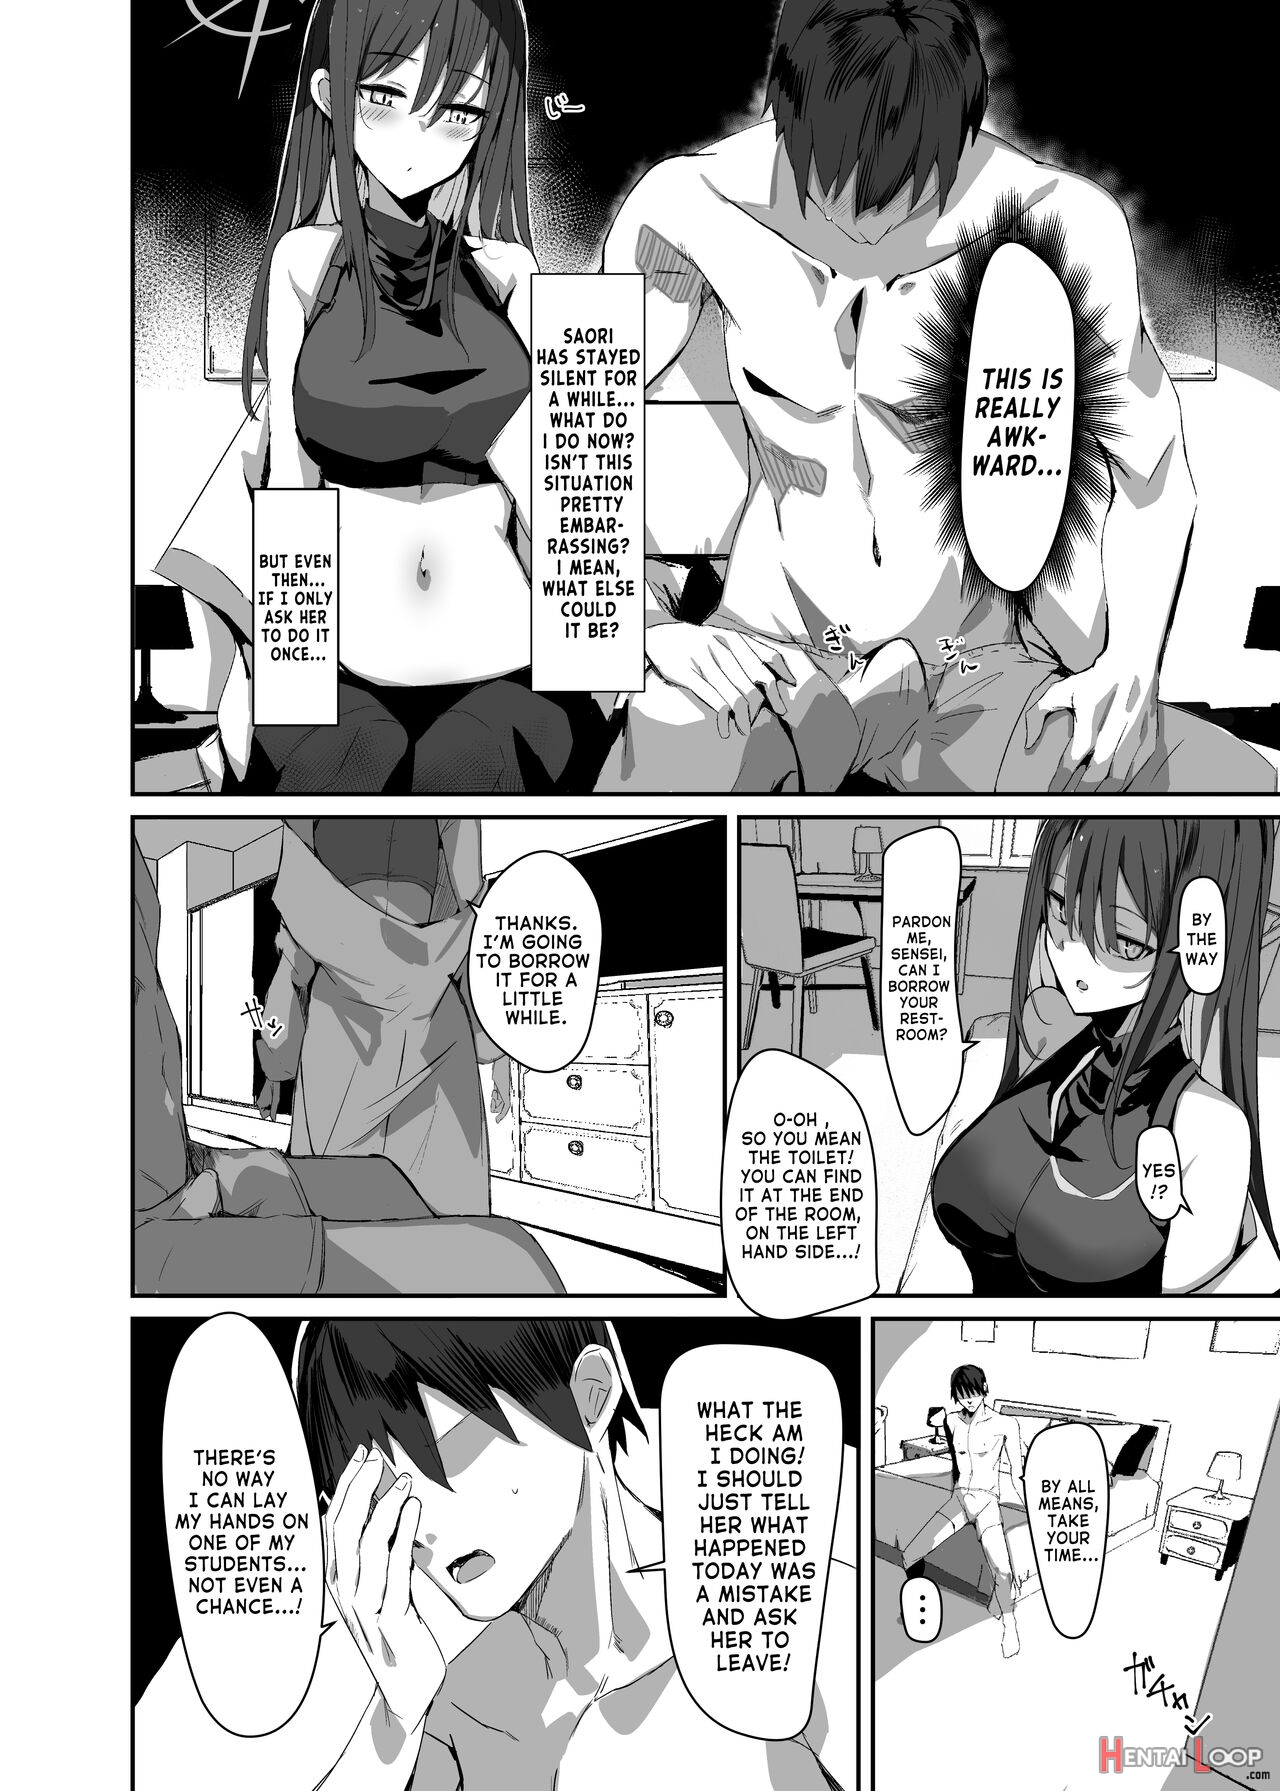 The Book Where I Hired A Sex Worker But Then Saori Showed Up And Just Like That We Had Sex page 8